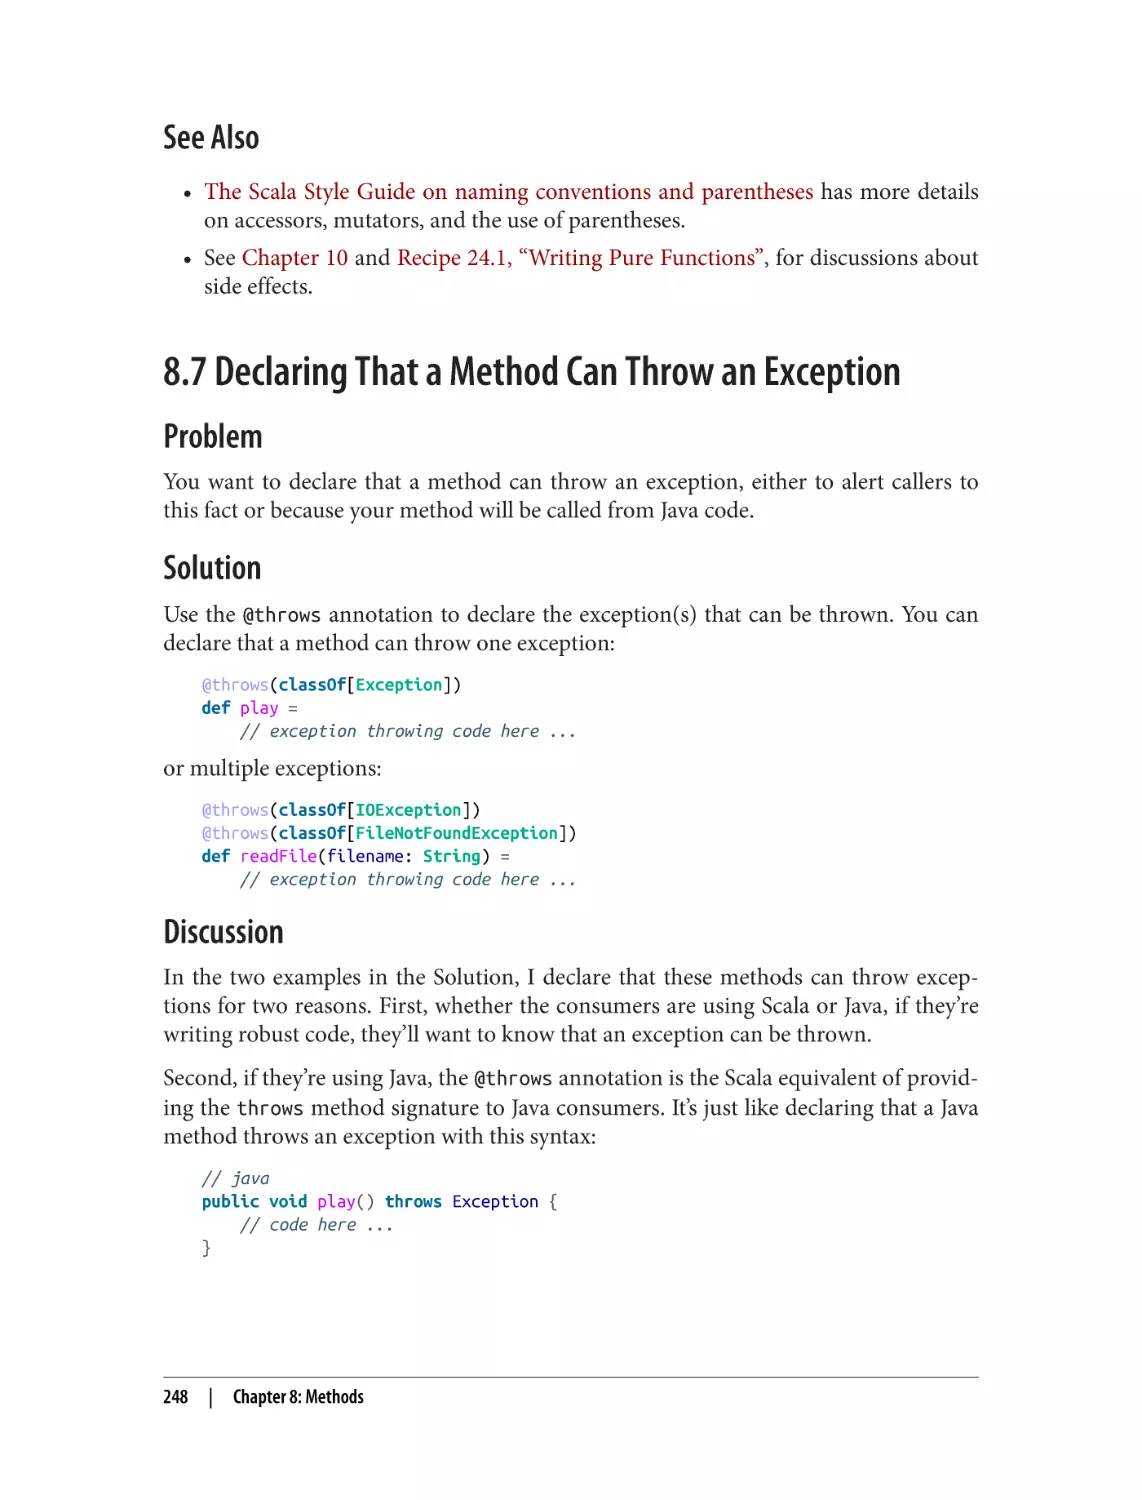 See Also
8.7 Declaring That a Method Can Throw an Exception
Problem
Solution
Discussion